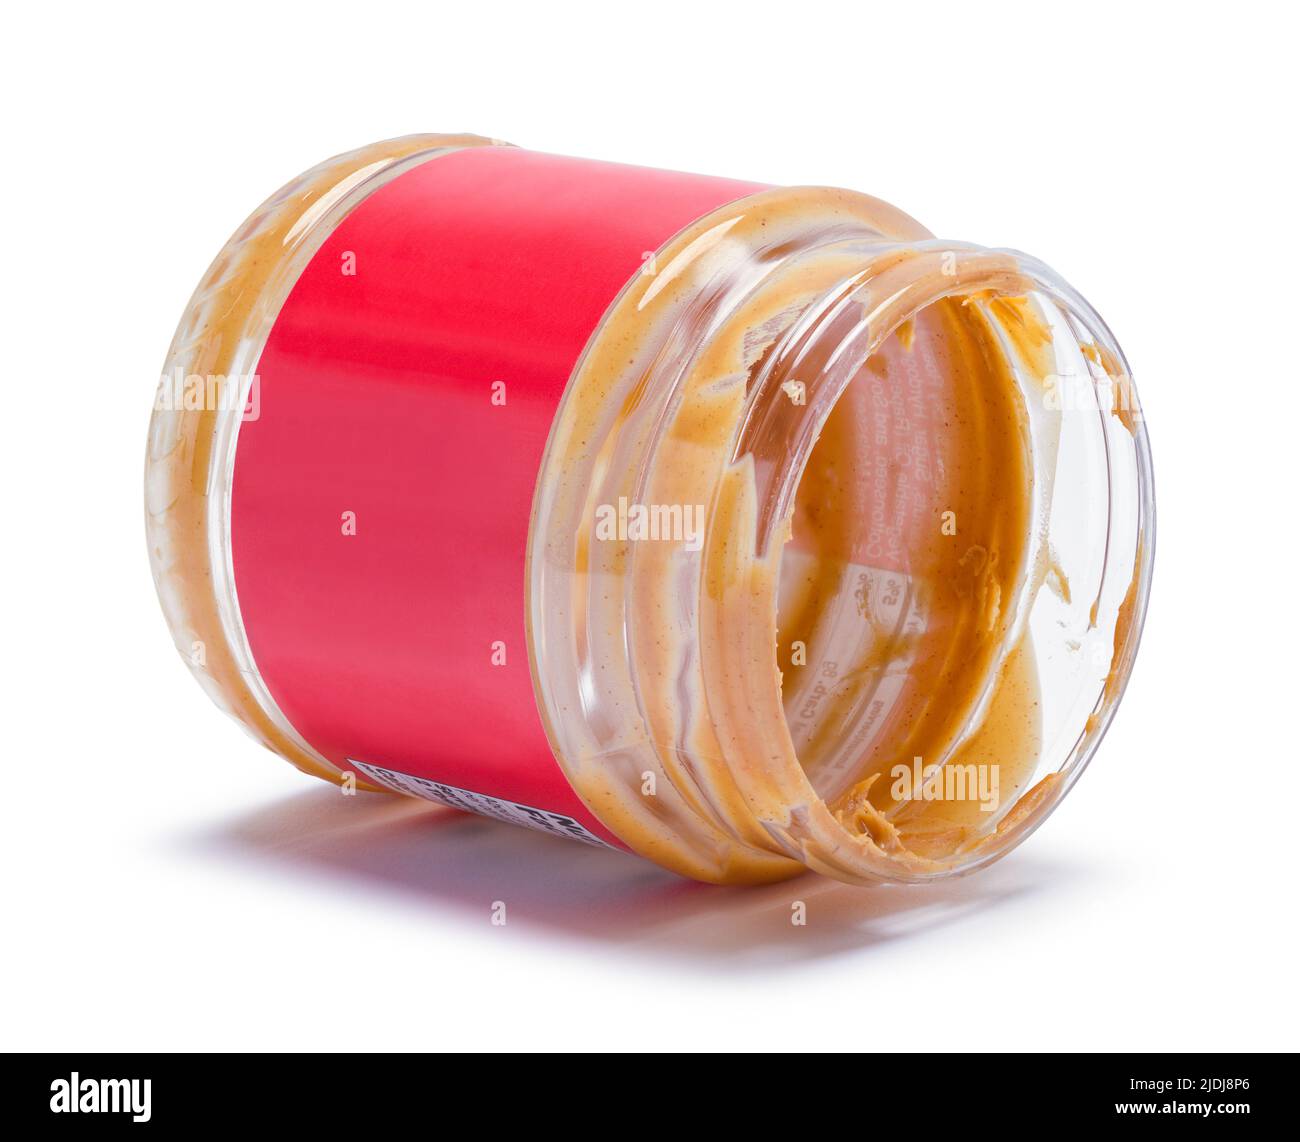 Empty Jar of Peanut Butter Cut Out on White. Stock Photo